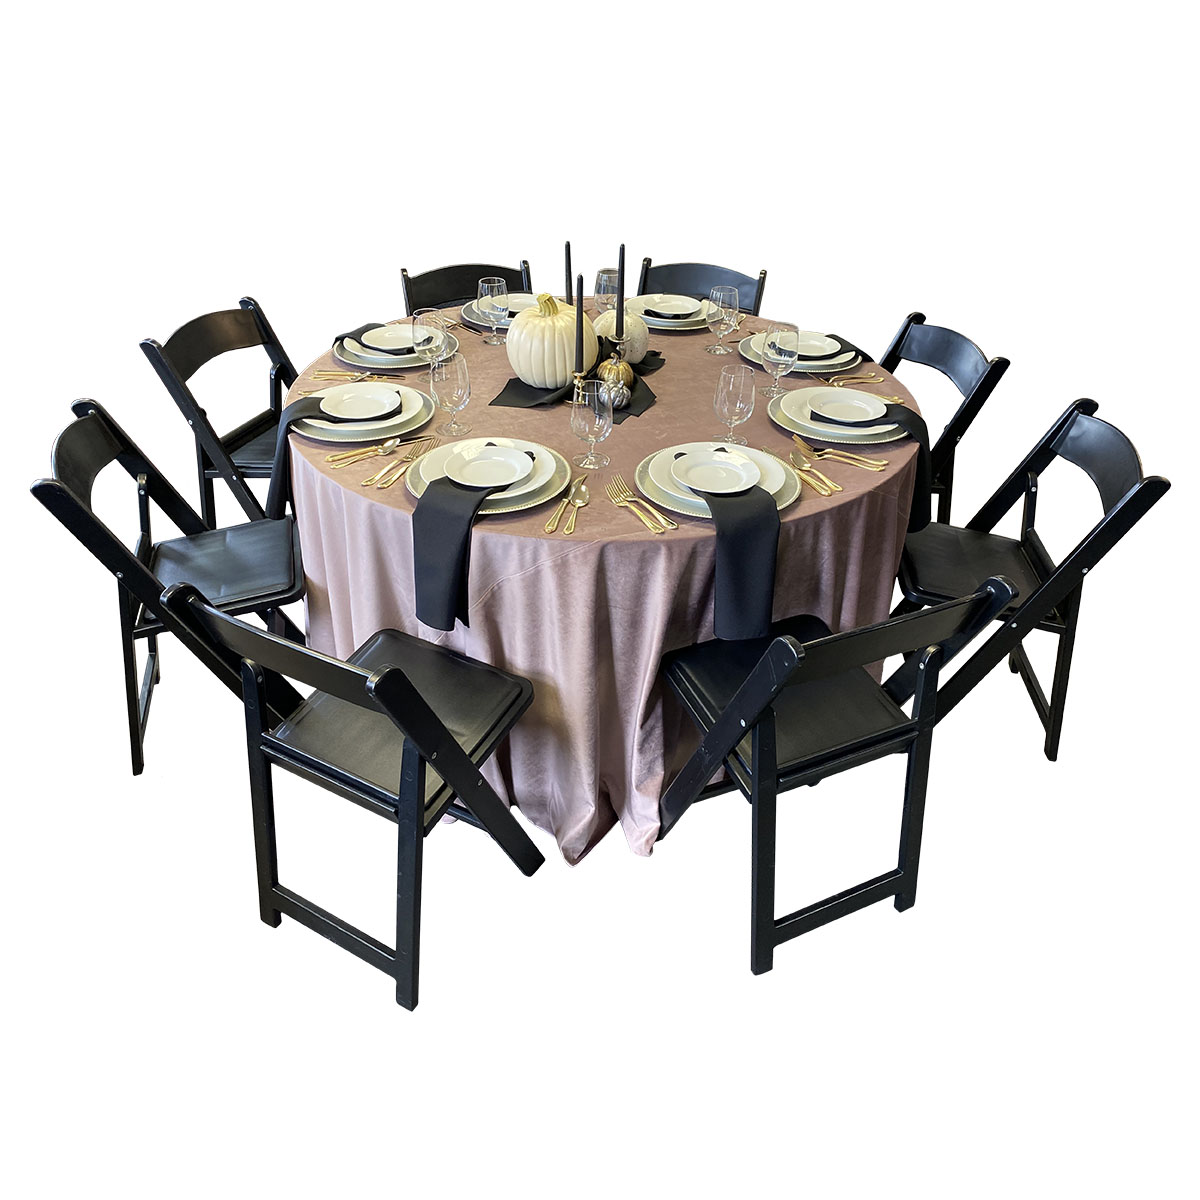 120" Round Rose Velvet Tablecover On 60" Round Table With Black Napkins, White Royal China, Gold Plated Flatware, 16oz Goblets And Black Garden Chairs